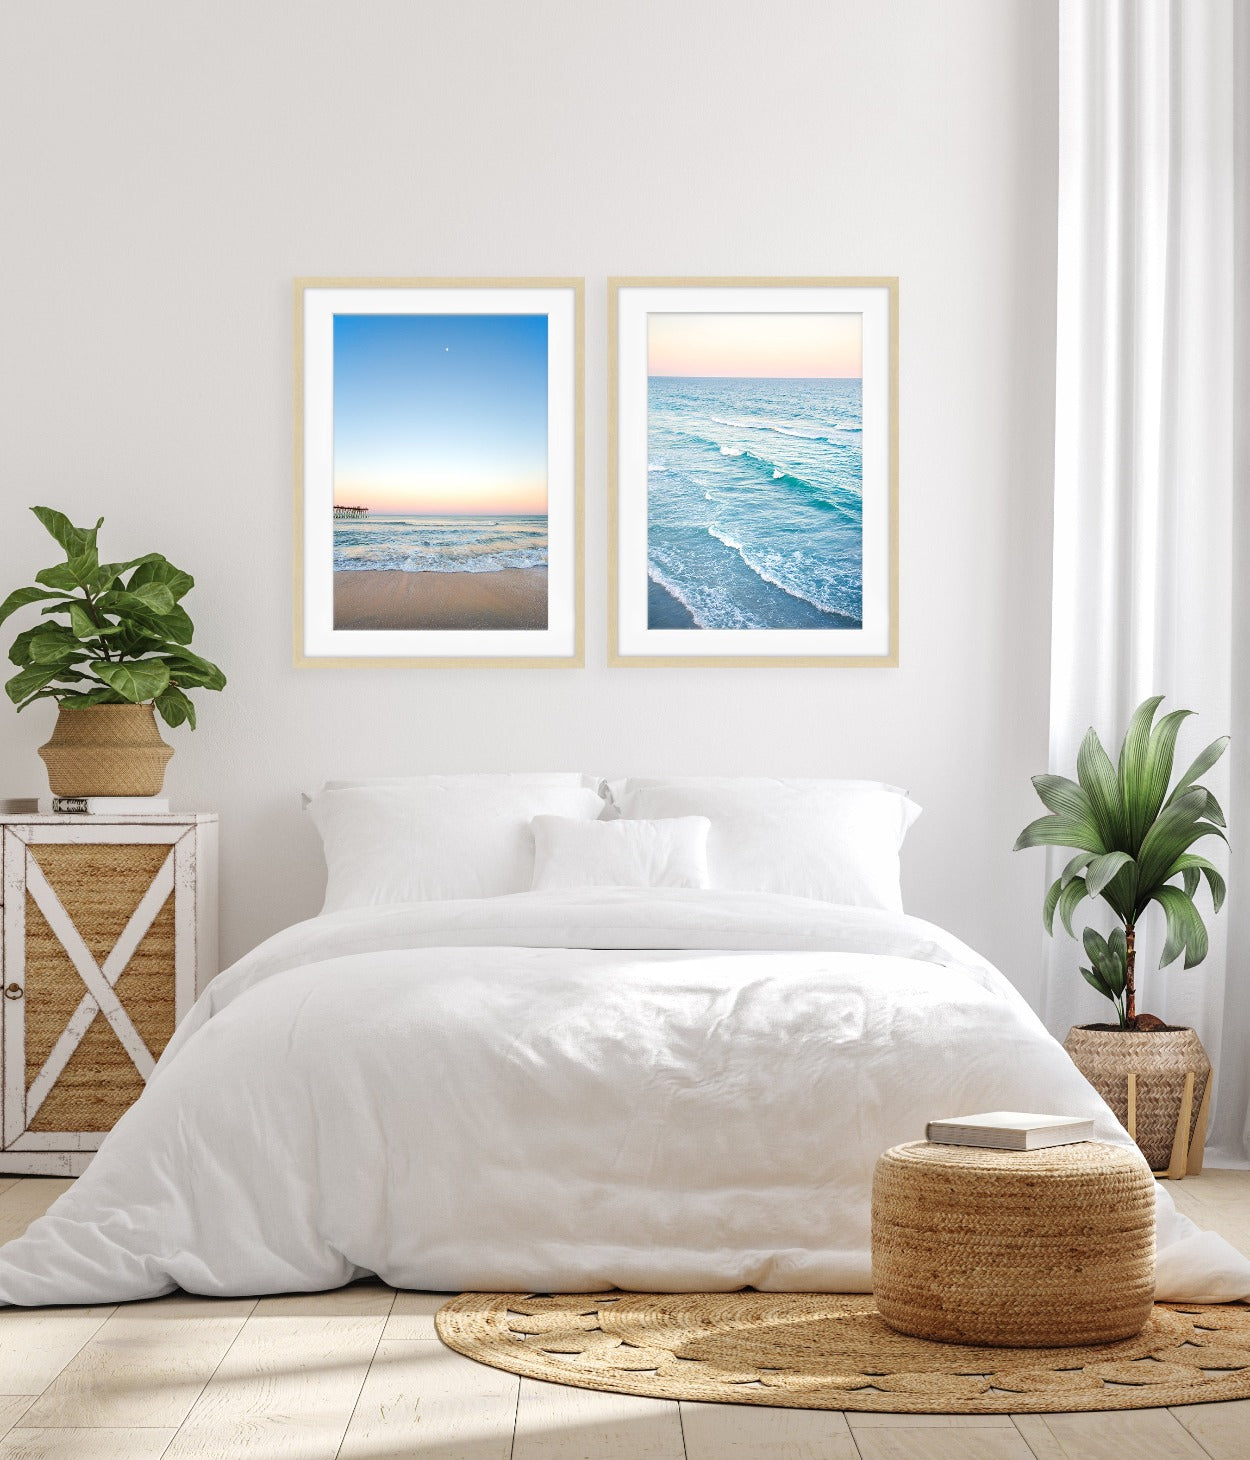 bright white bedroom decor, set of 2 blue beach photographs by Wright and Roam